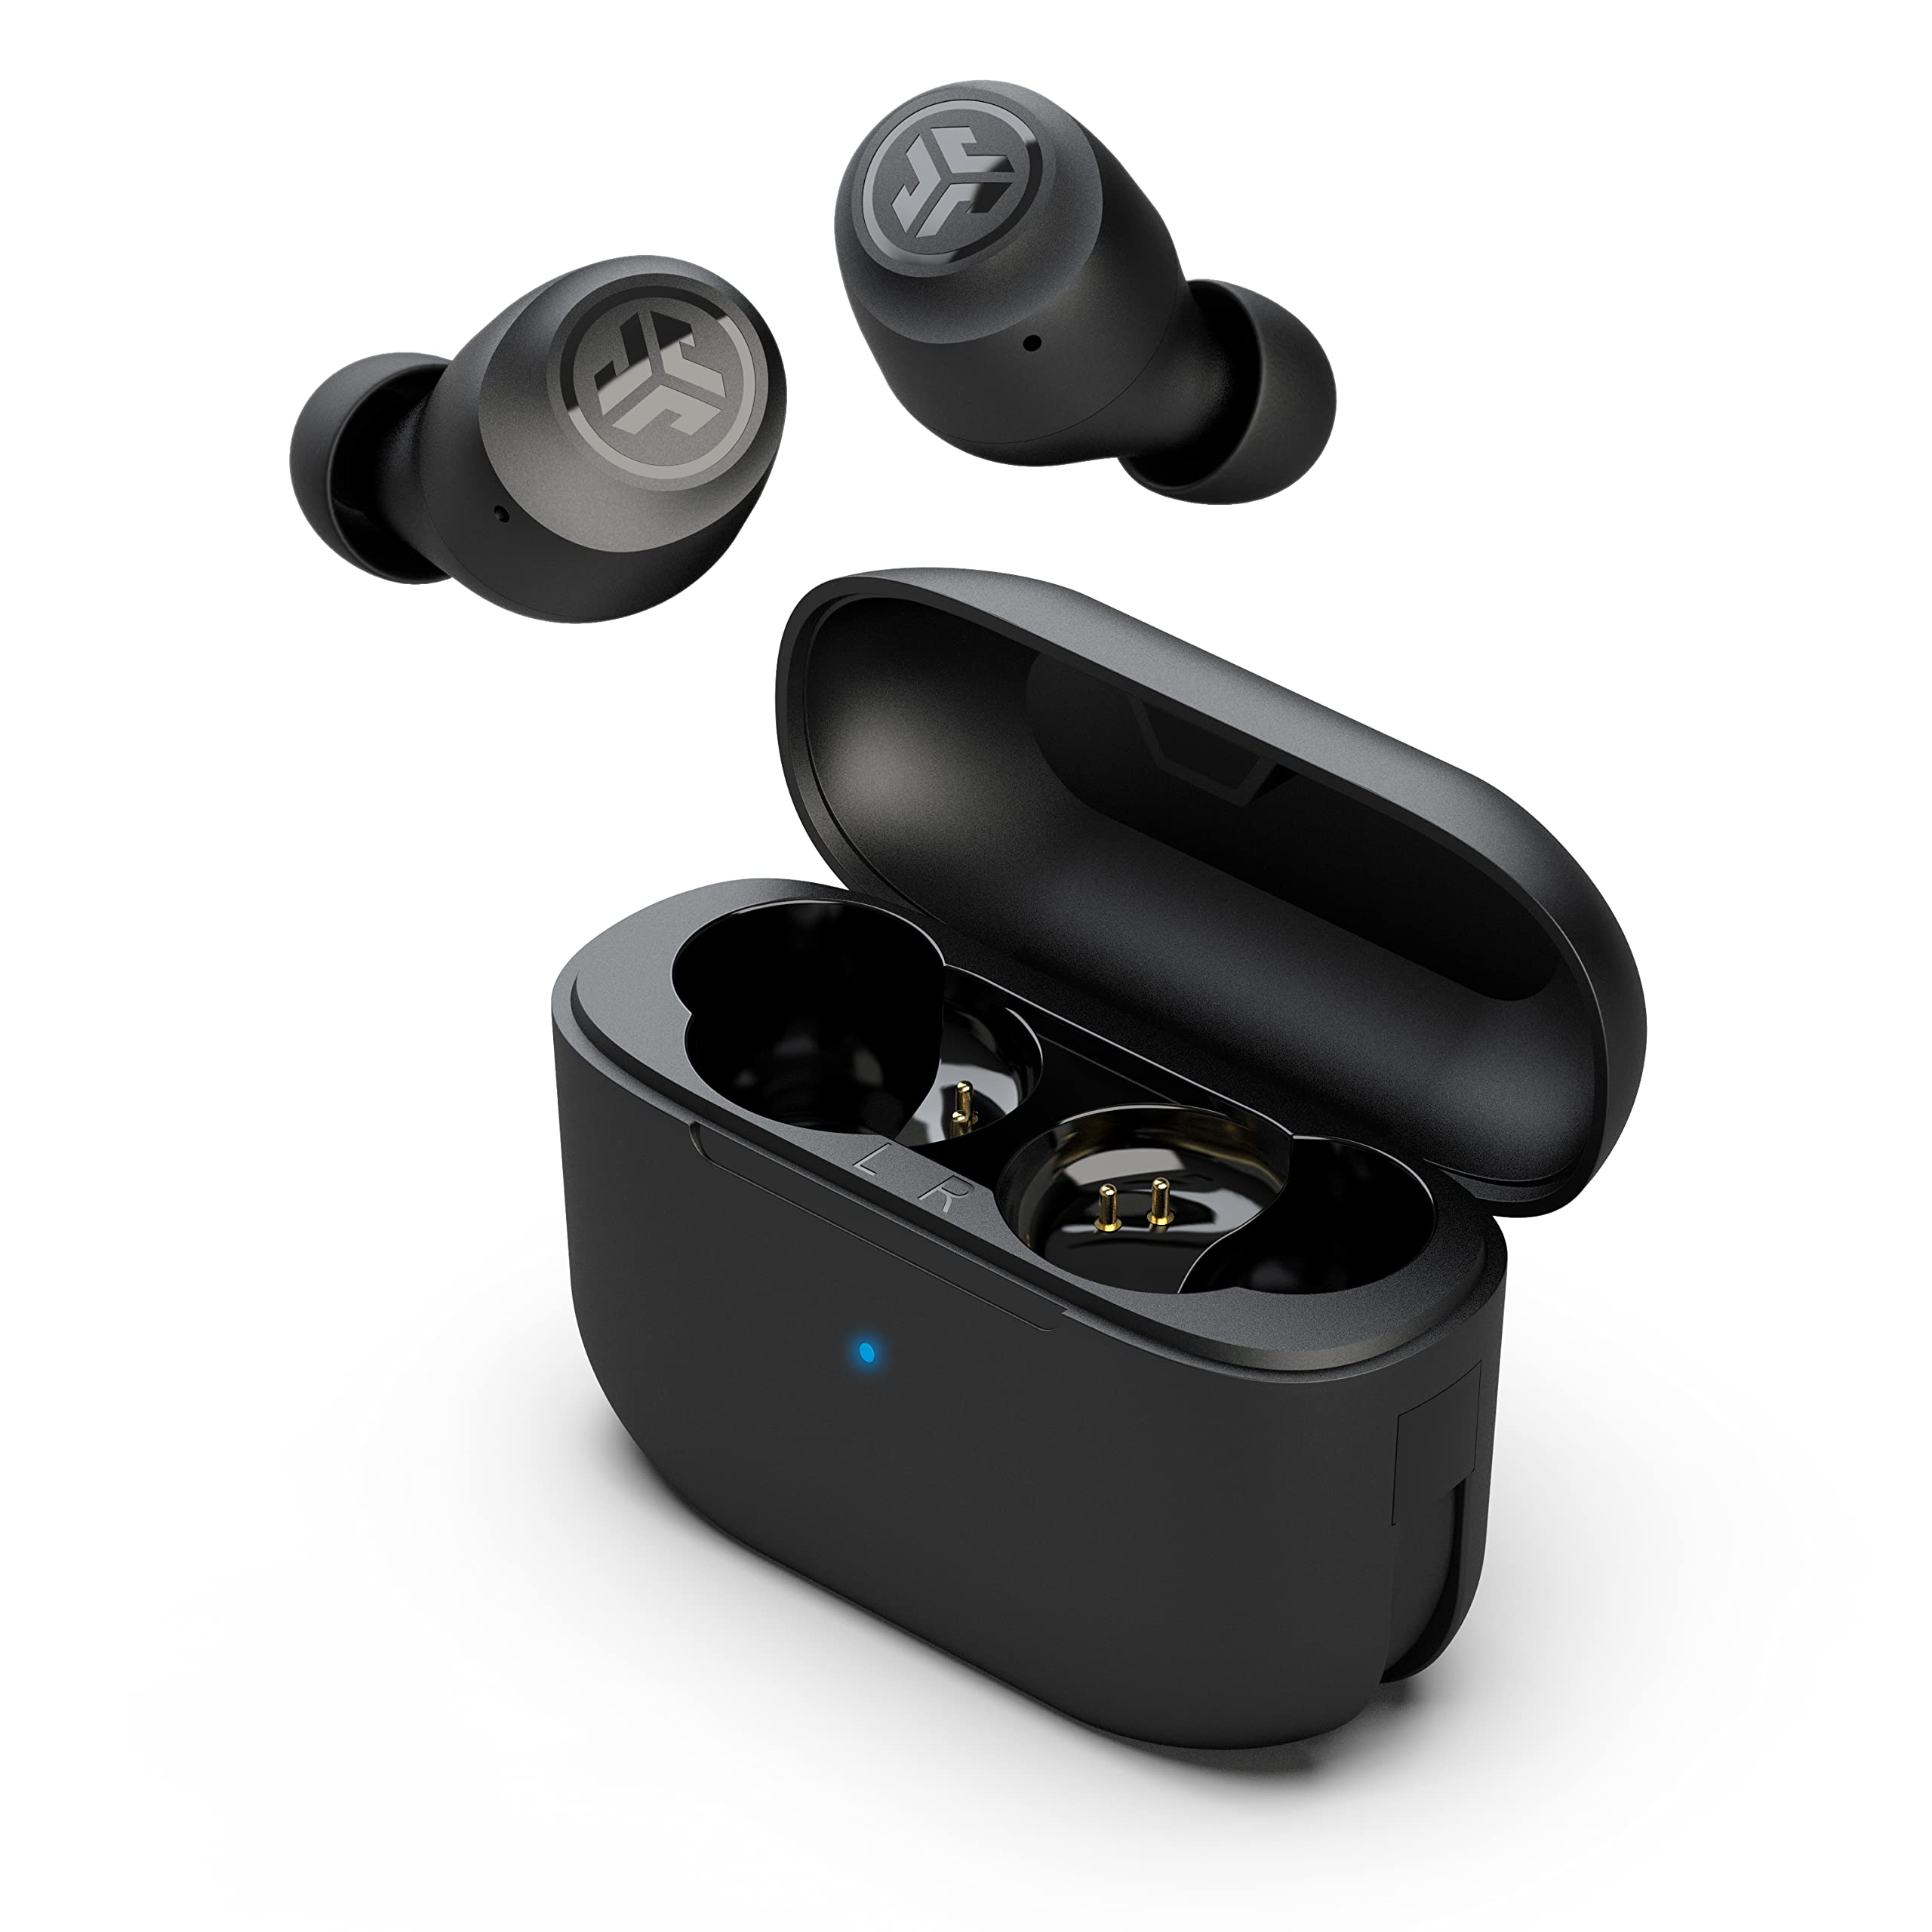 How To Turn Off JLab Wireless Earbuds